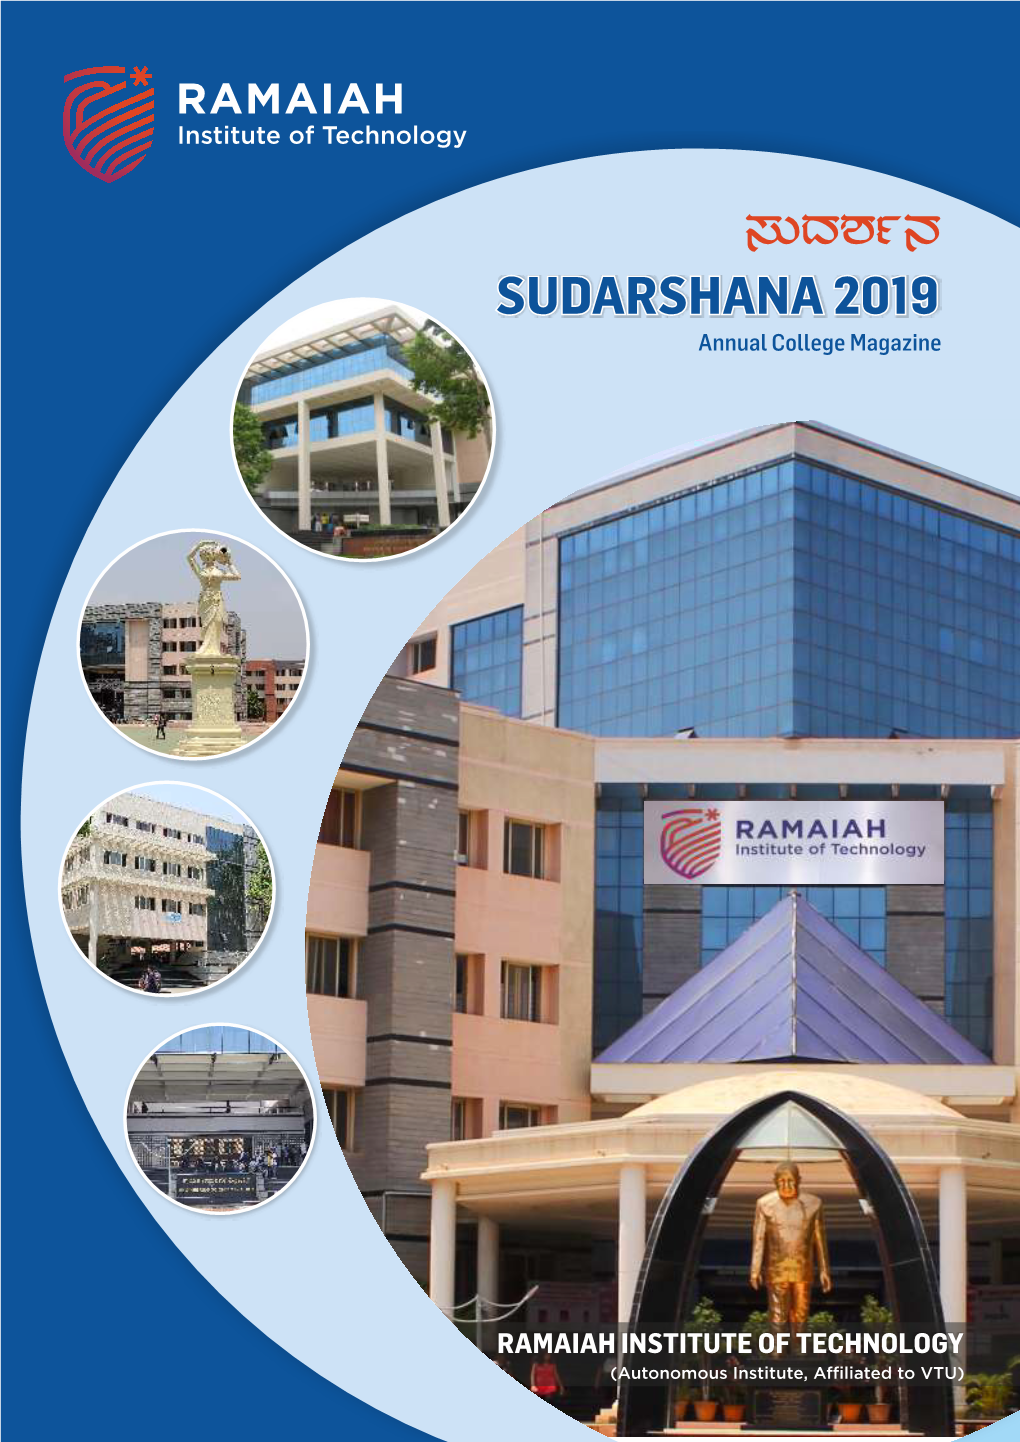 SUDARSHANA 2019, Provides an Important Stage and Wonderful Platform to the Creativity and the Hidden Talents of the Students